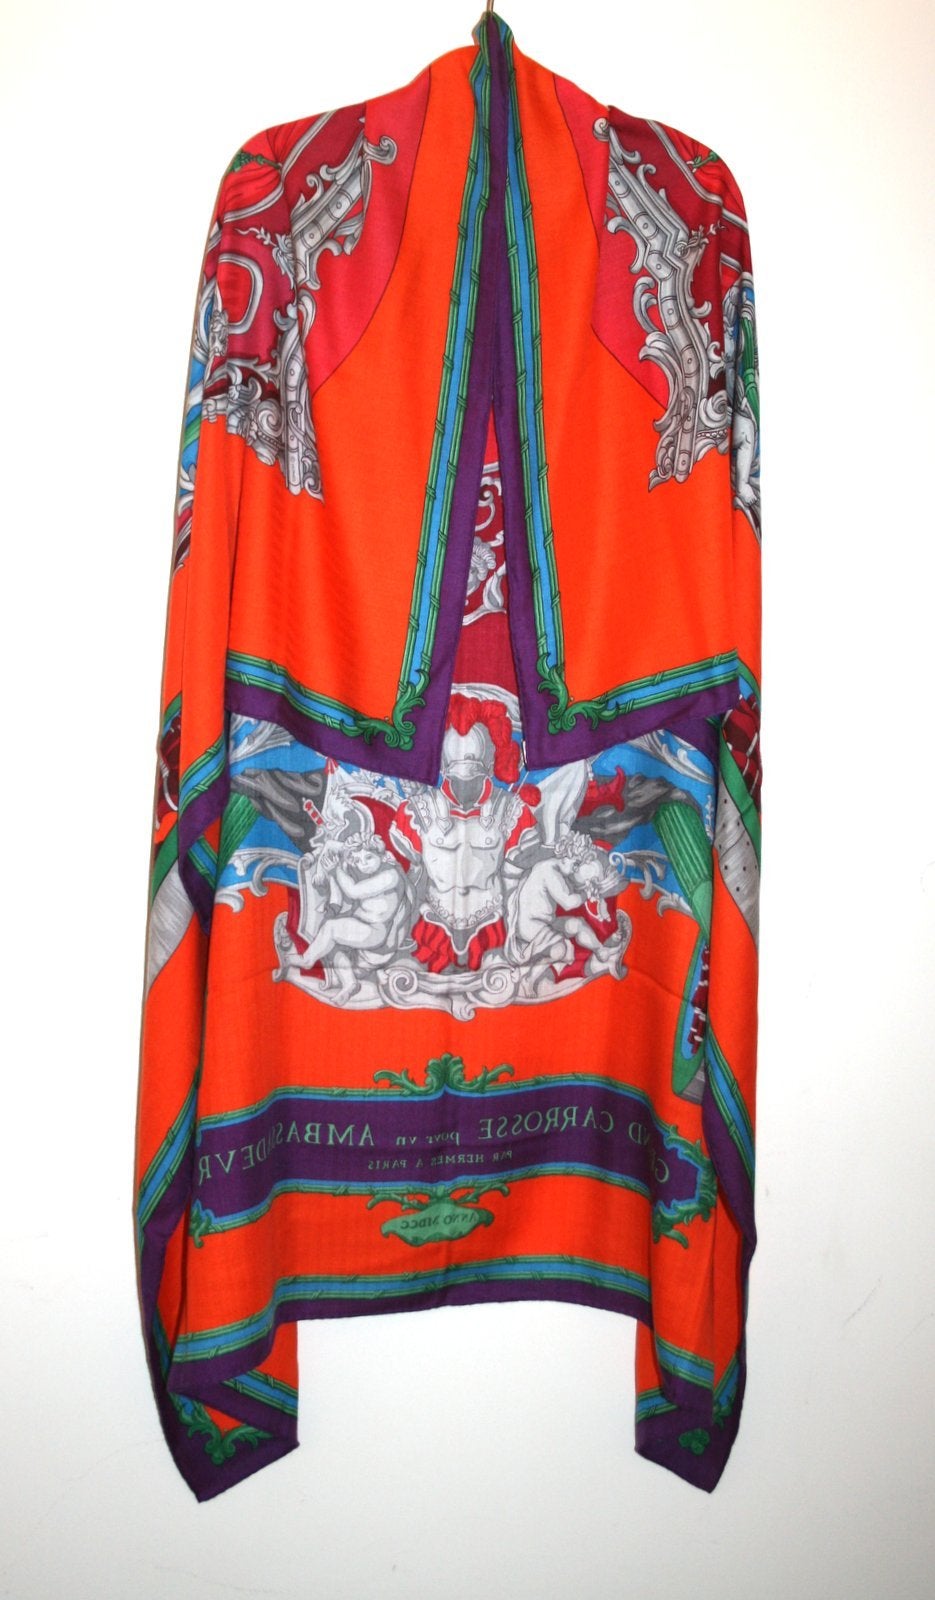 Pristine and unworn with the tag still attached, this Hermès Grand Carrosse Cashmere and Silk GM Shawl is a beautiful collectible.    The Lisa Coutin design features a majestic carriage on an orange red background with accents of purple and green.